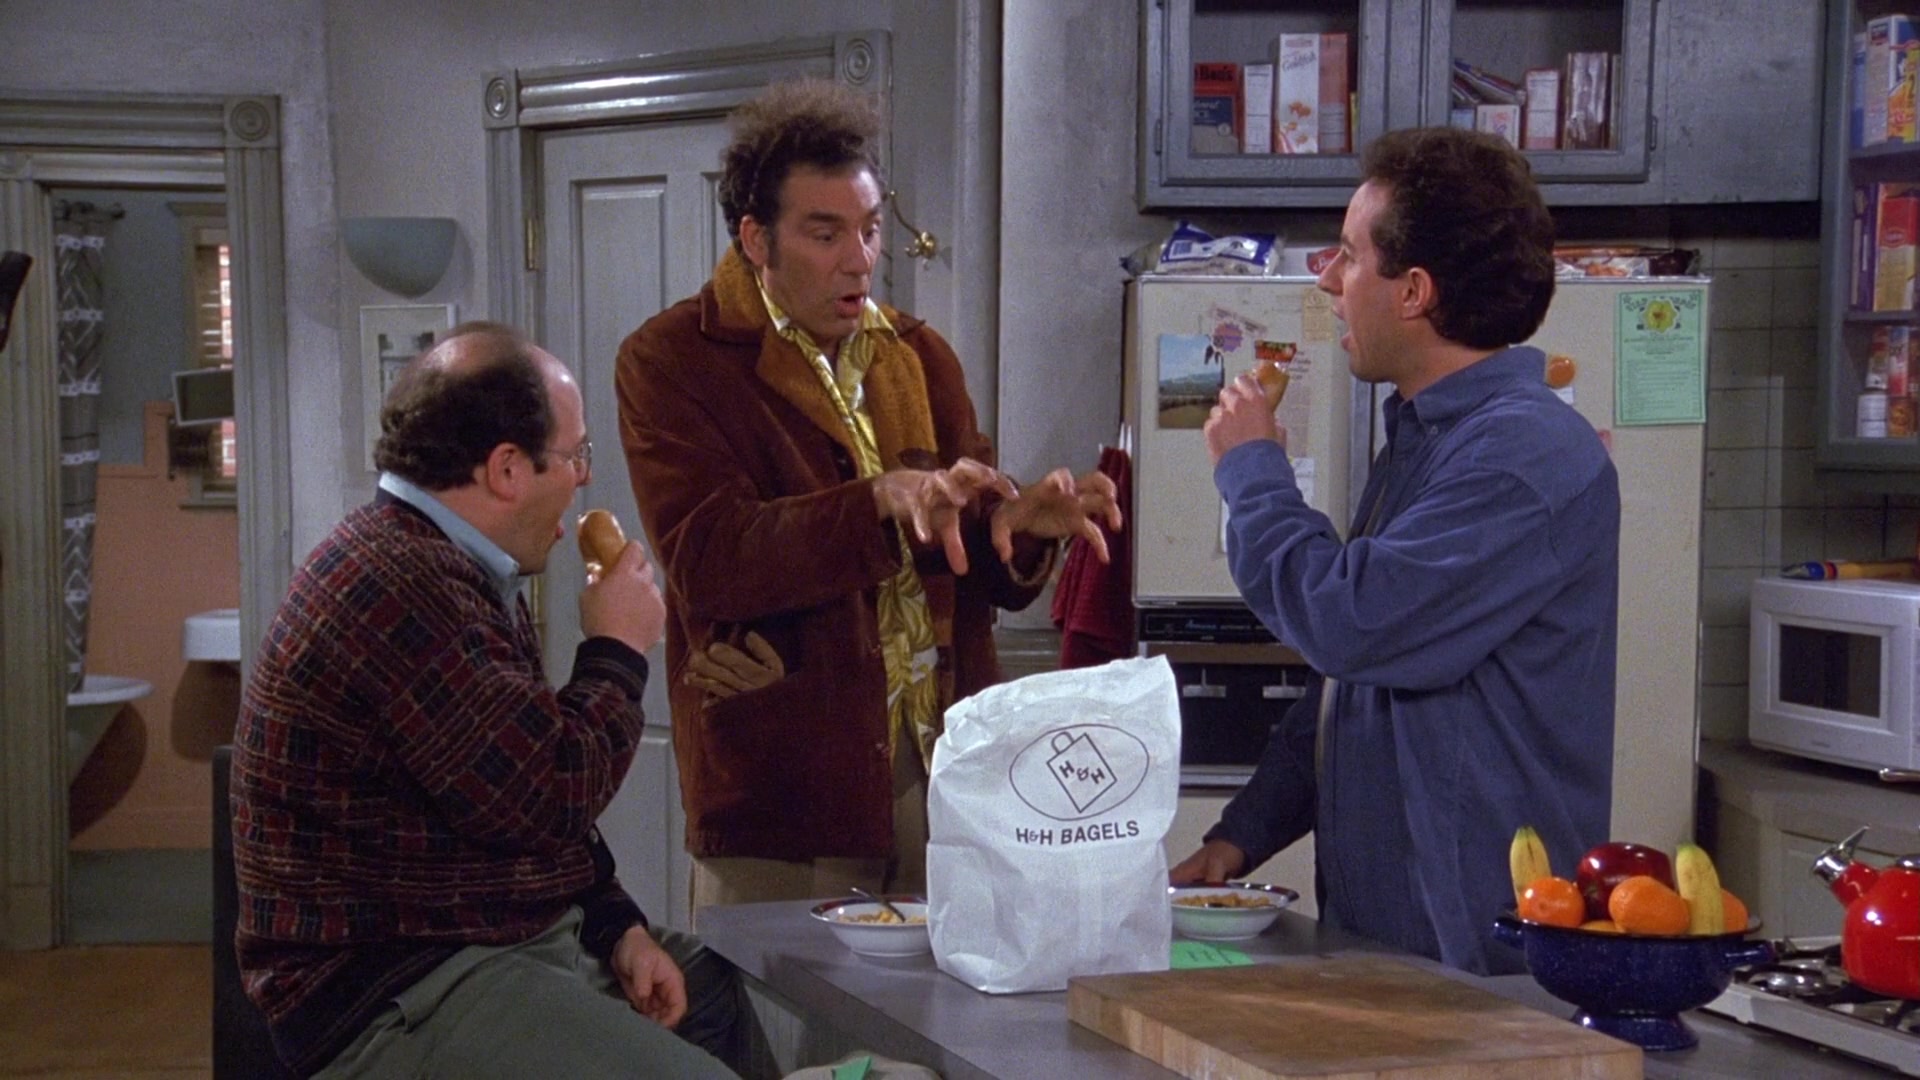 H H Bagels Enjoyed By Jerry Seinfeld Jason Alexander As George Costanza Michael Richards As Cosmo Kramer In Seinfeld Season 9 Episode 10 The Strike 1997